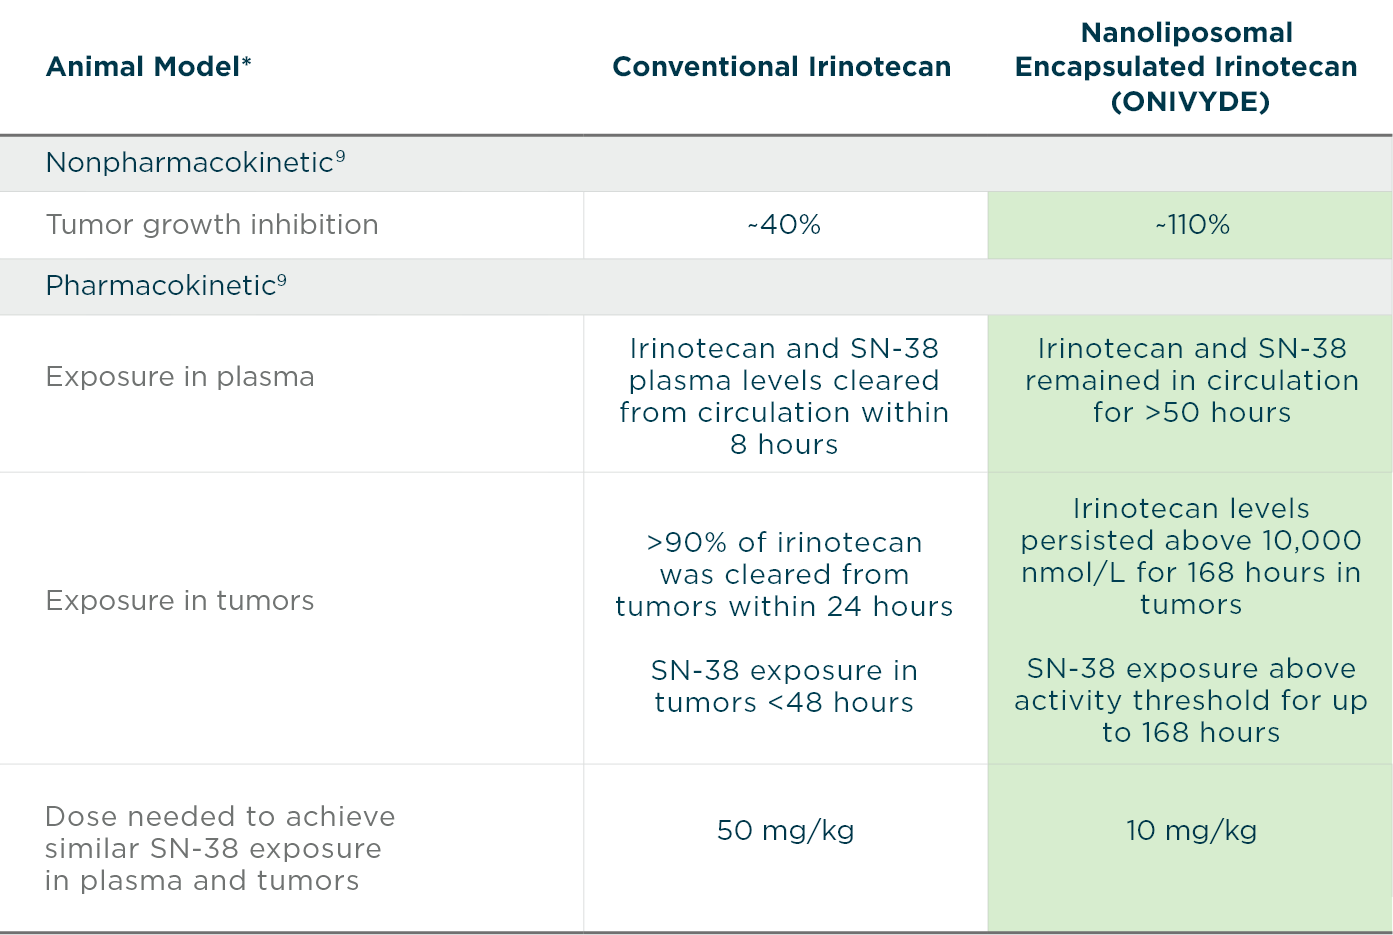 Table comparing the different pharmacokinetics of ONIVYDE® (irinotecan liposome injection), for metastatic pancreatic cancer, and conventional irinotecan